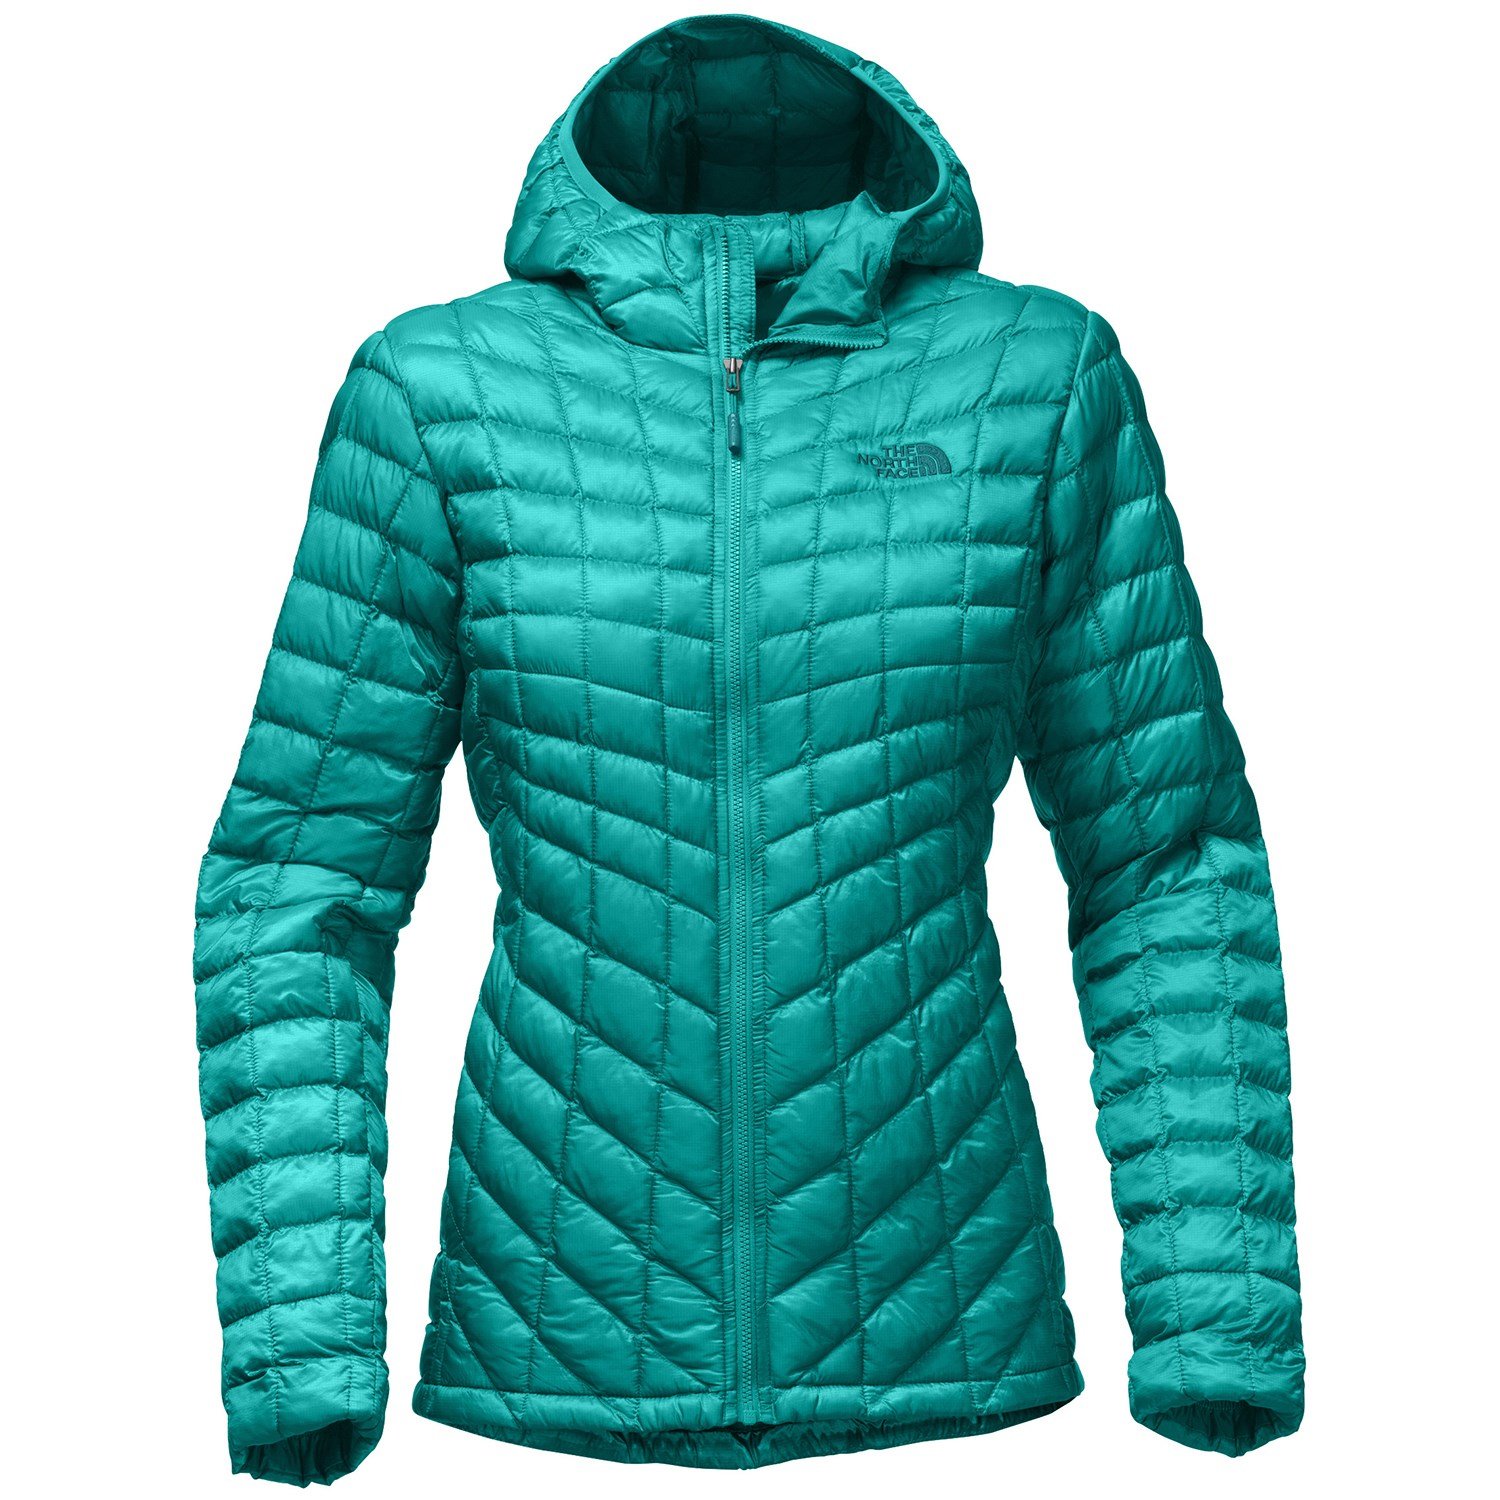 second hand north face women's jacket